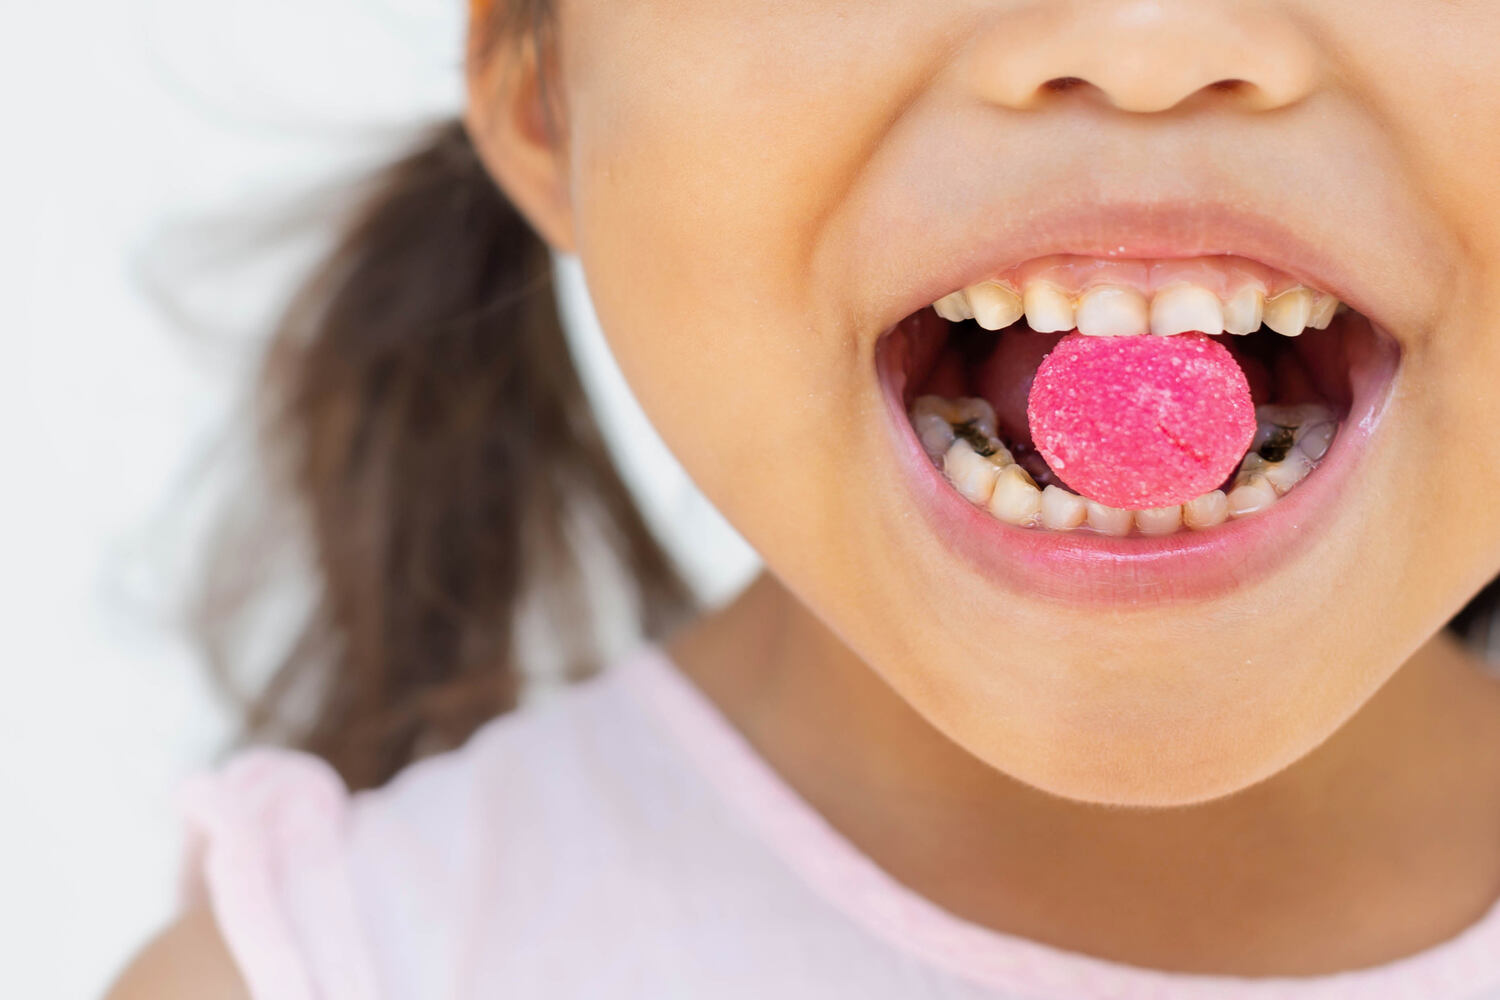 Tooth decay in kids